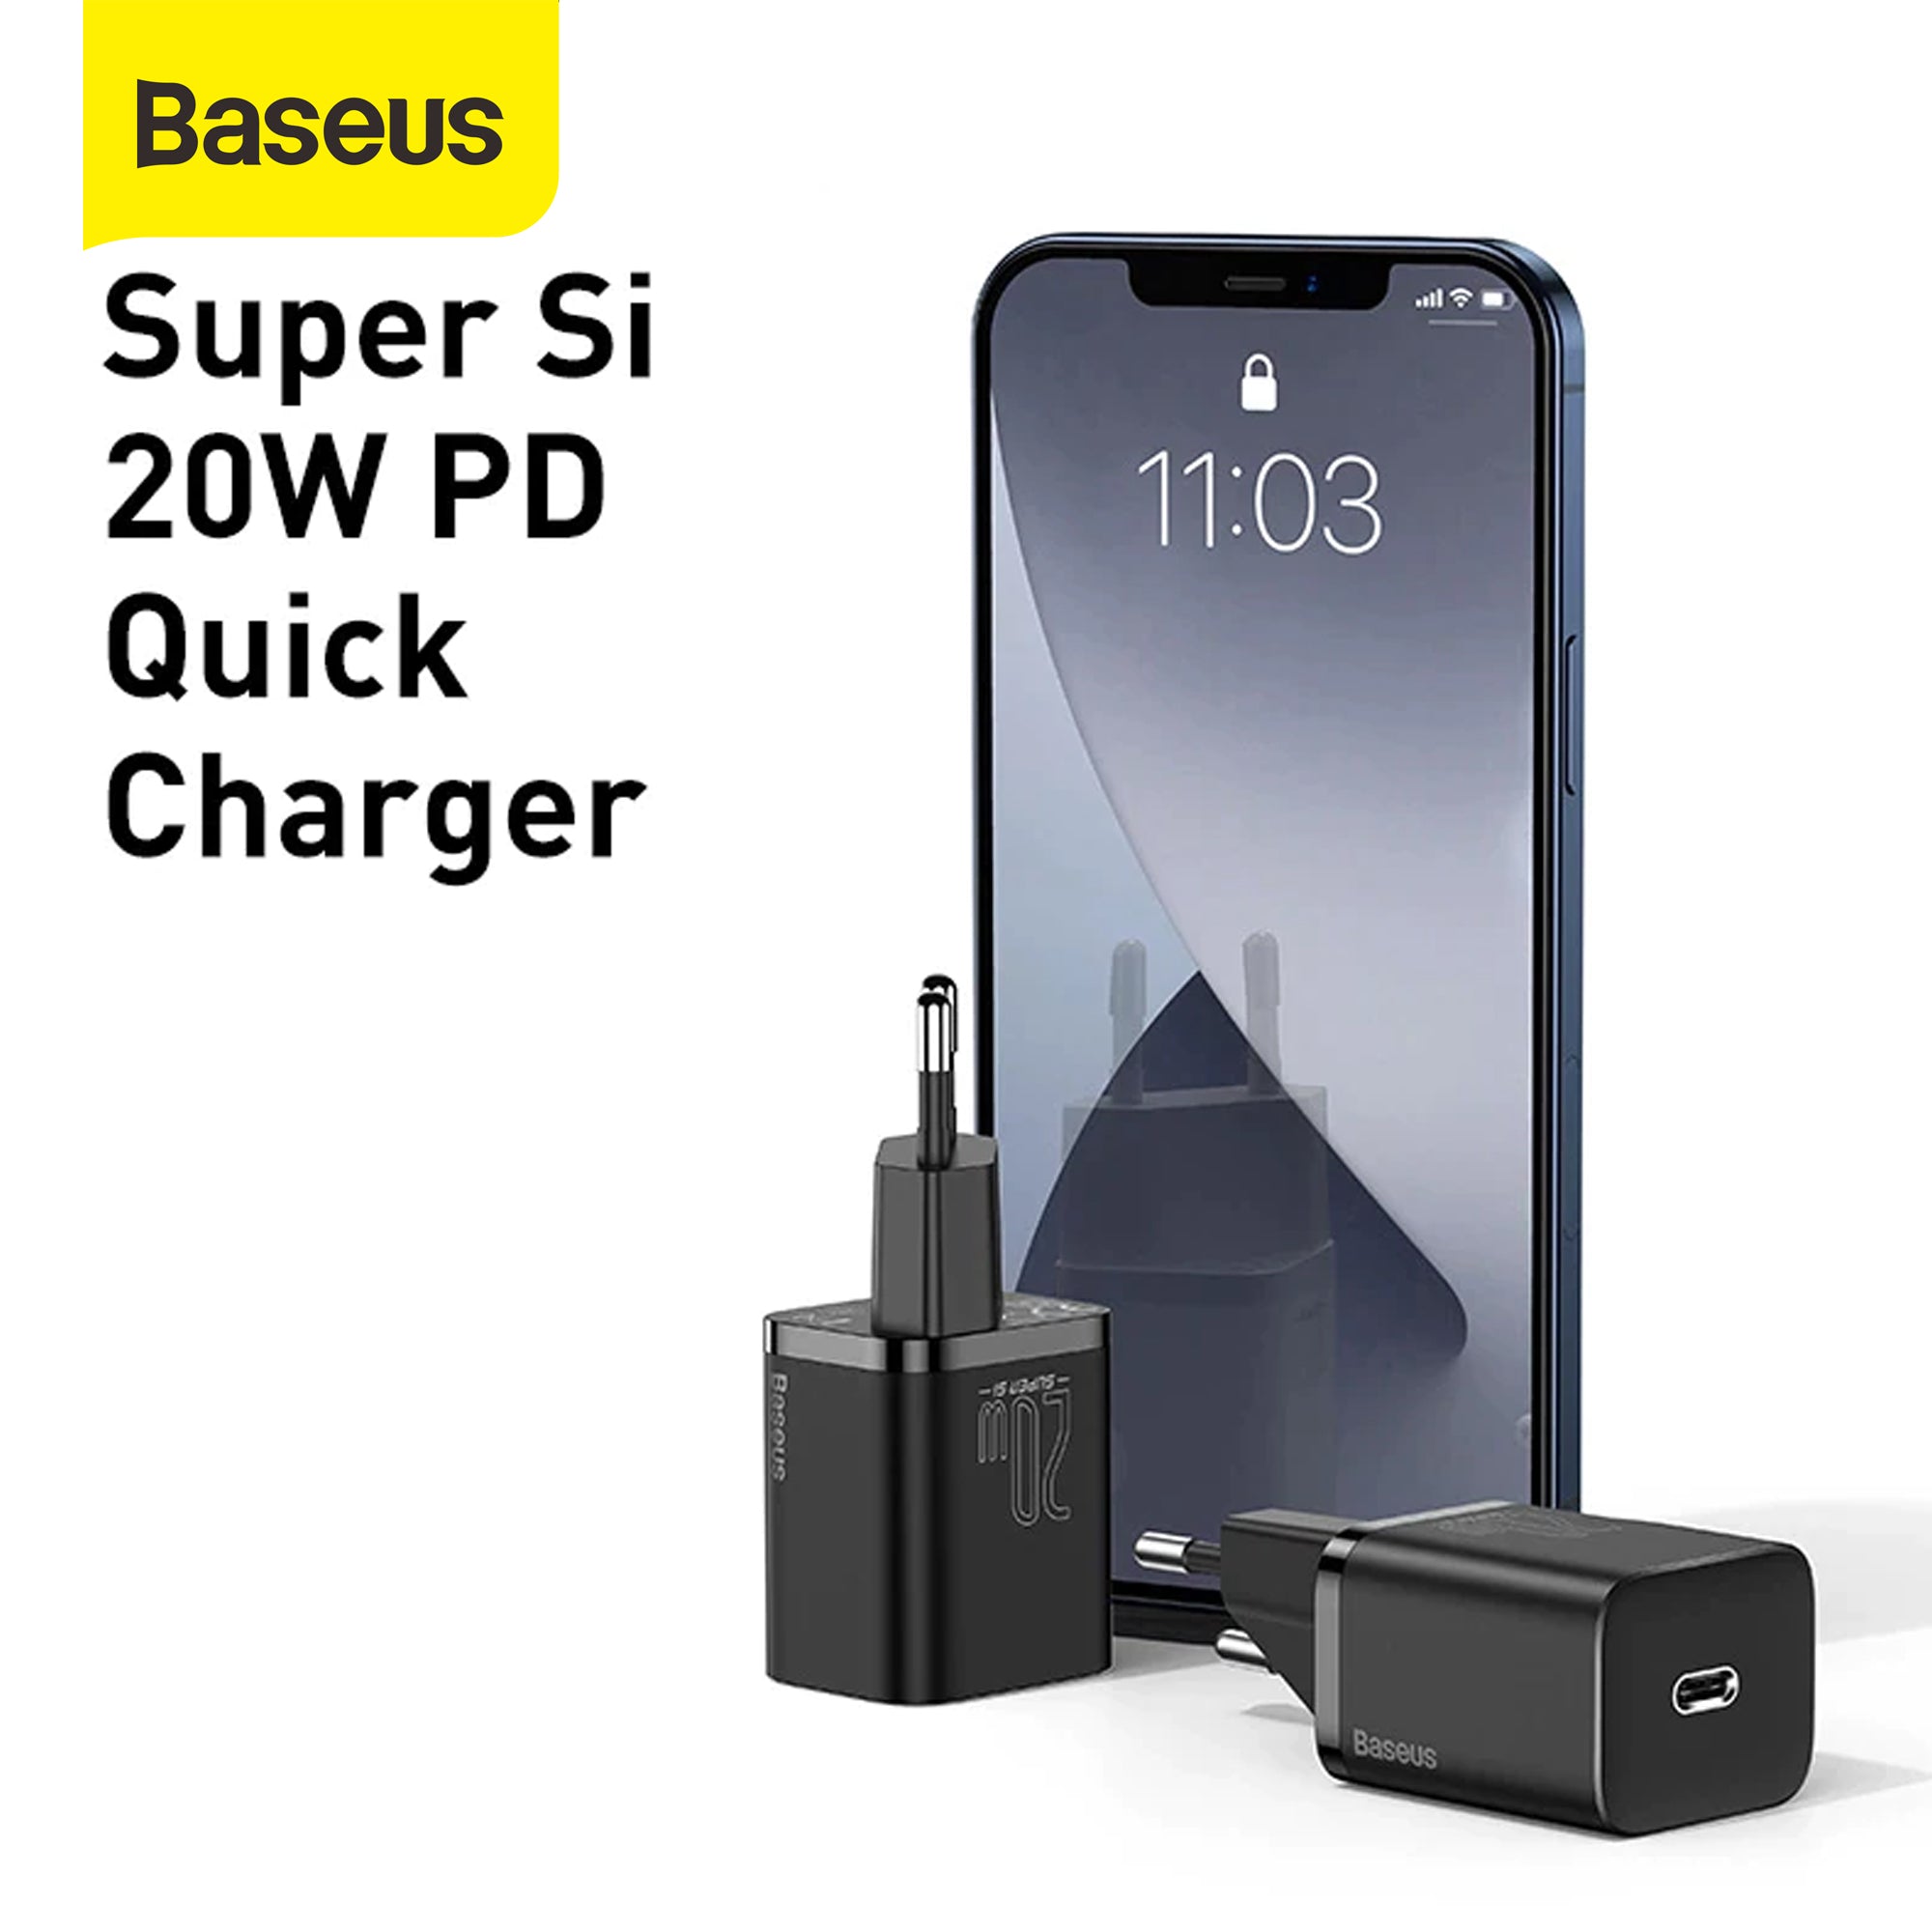 Baseus Kepala Charger Super Si Quick Charger Type C PD 20W iPhone 12 - Baseus Indonesia